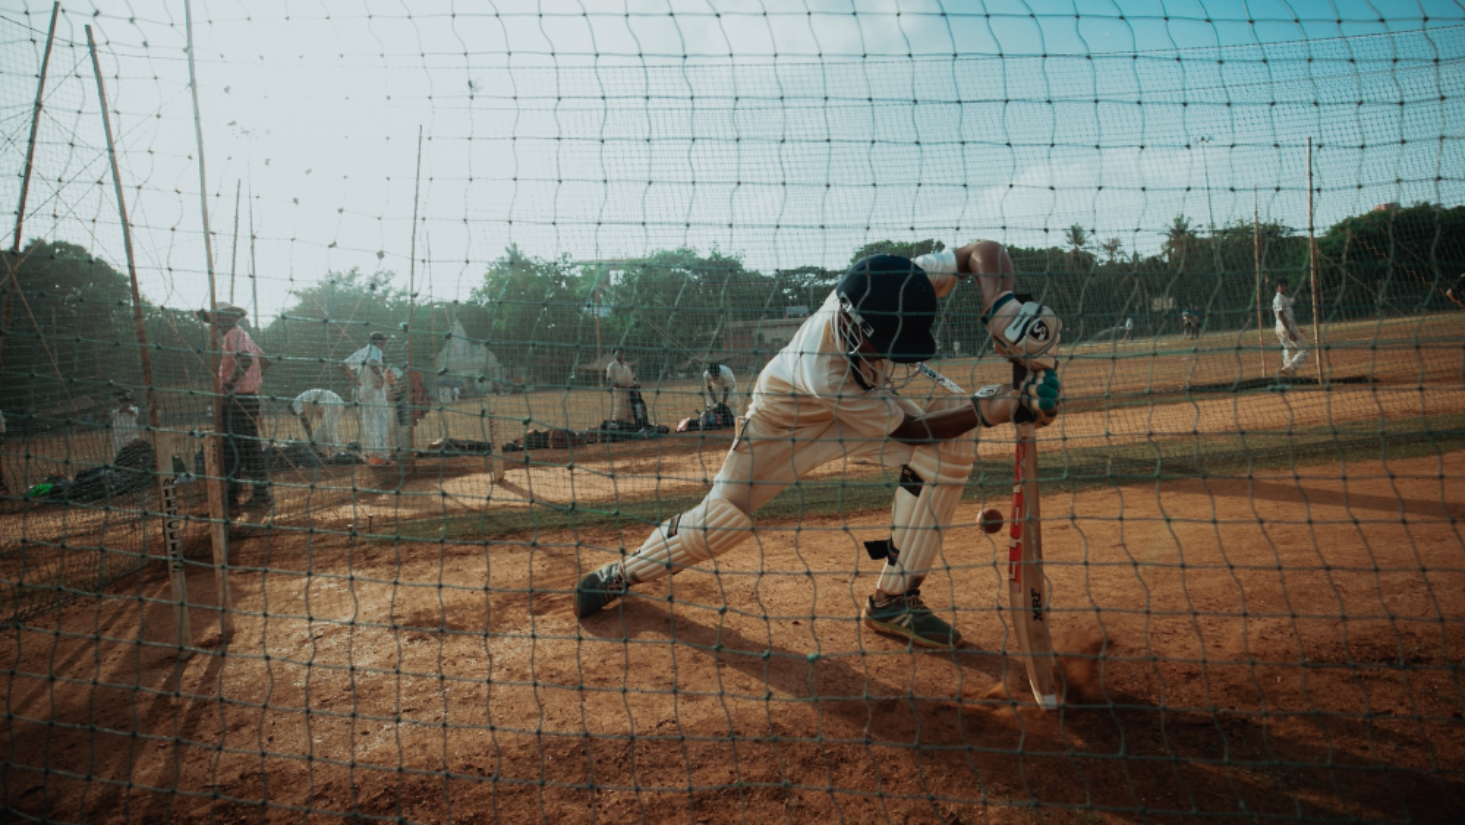 How To Read Pitches In Cricket And Adapt To Diverse Surfaces